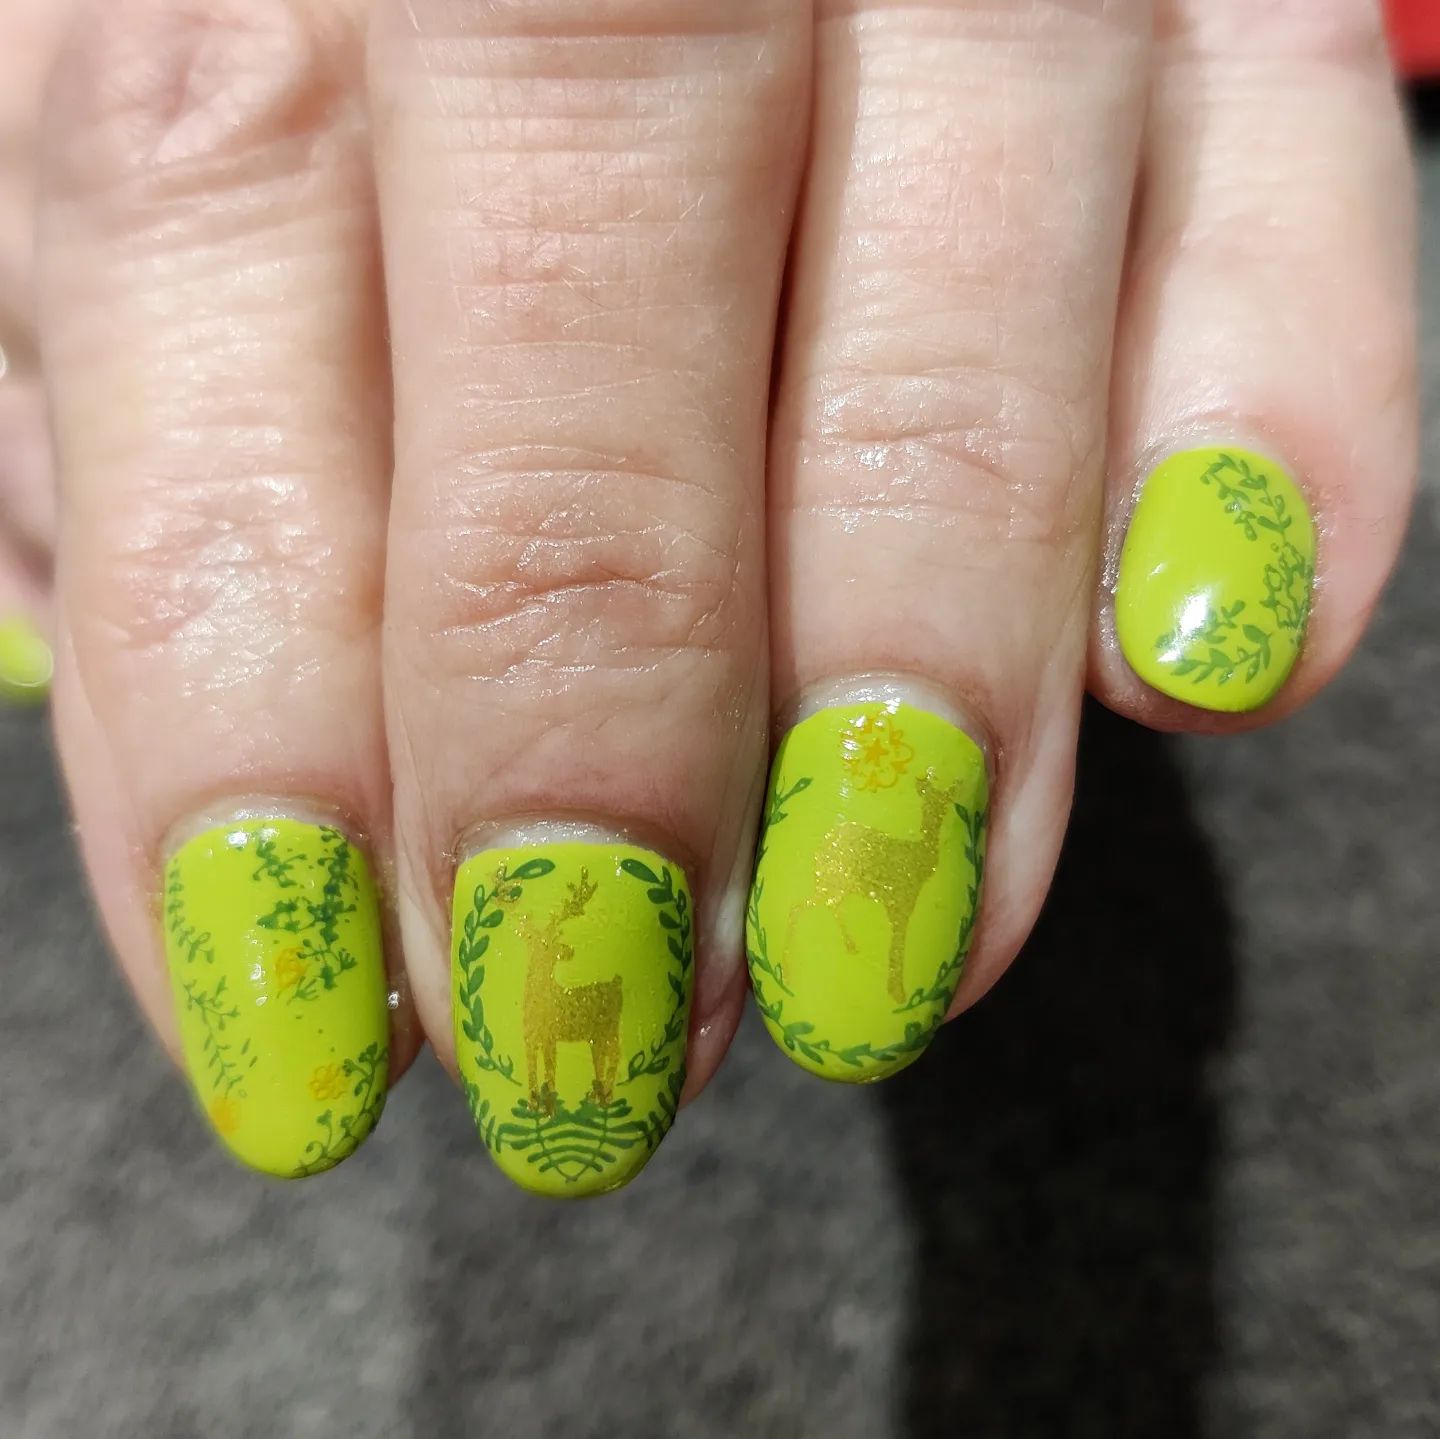 In this nail design, you will feel the nature to the fullest. Green woodland nail is a type of nail that uses green color to create an earthy and natural look. It's a great way to get a little more creative with your oval nails.